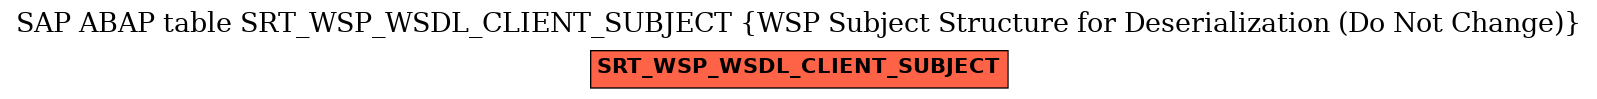 E-R Diagram for table SRT_WSP_WSDL_CLIENT_SUBJECT (WSP Subject Structure for Deserialization (Do Not Change))